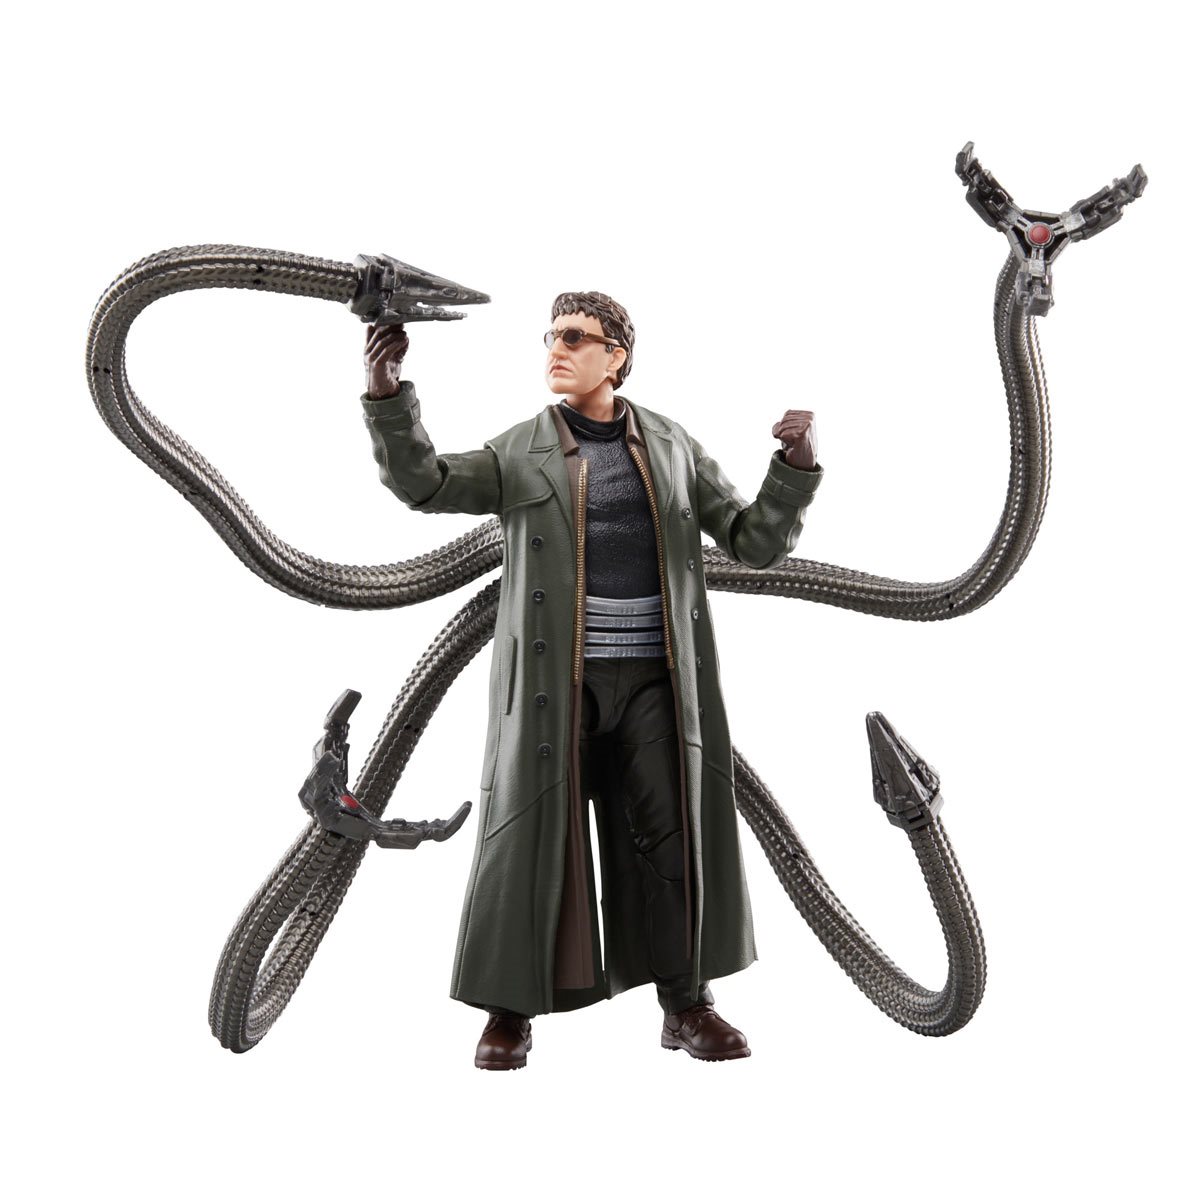 Marvel The Amazing Spider-Man Doctor Octopus Action Figure Toys